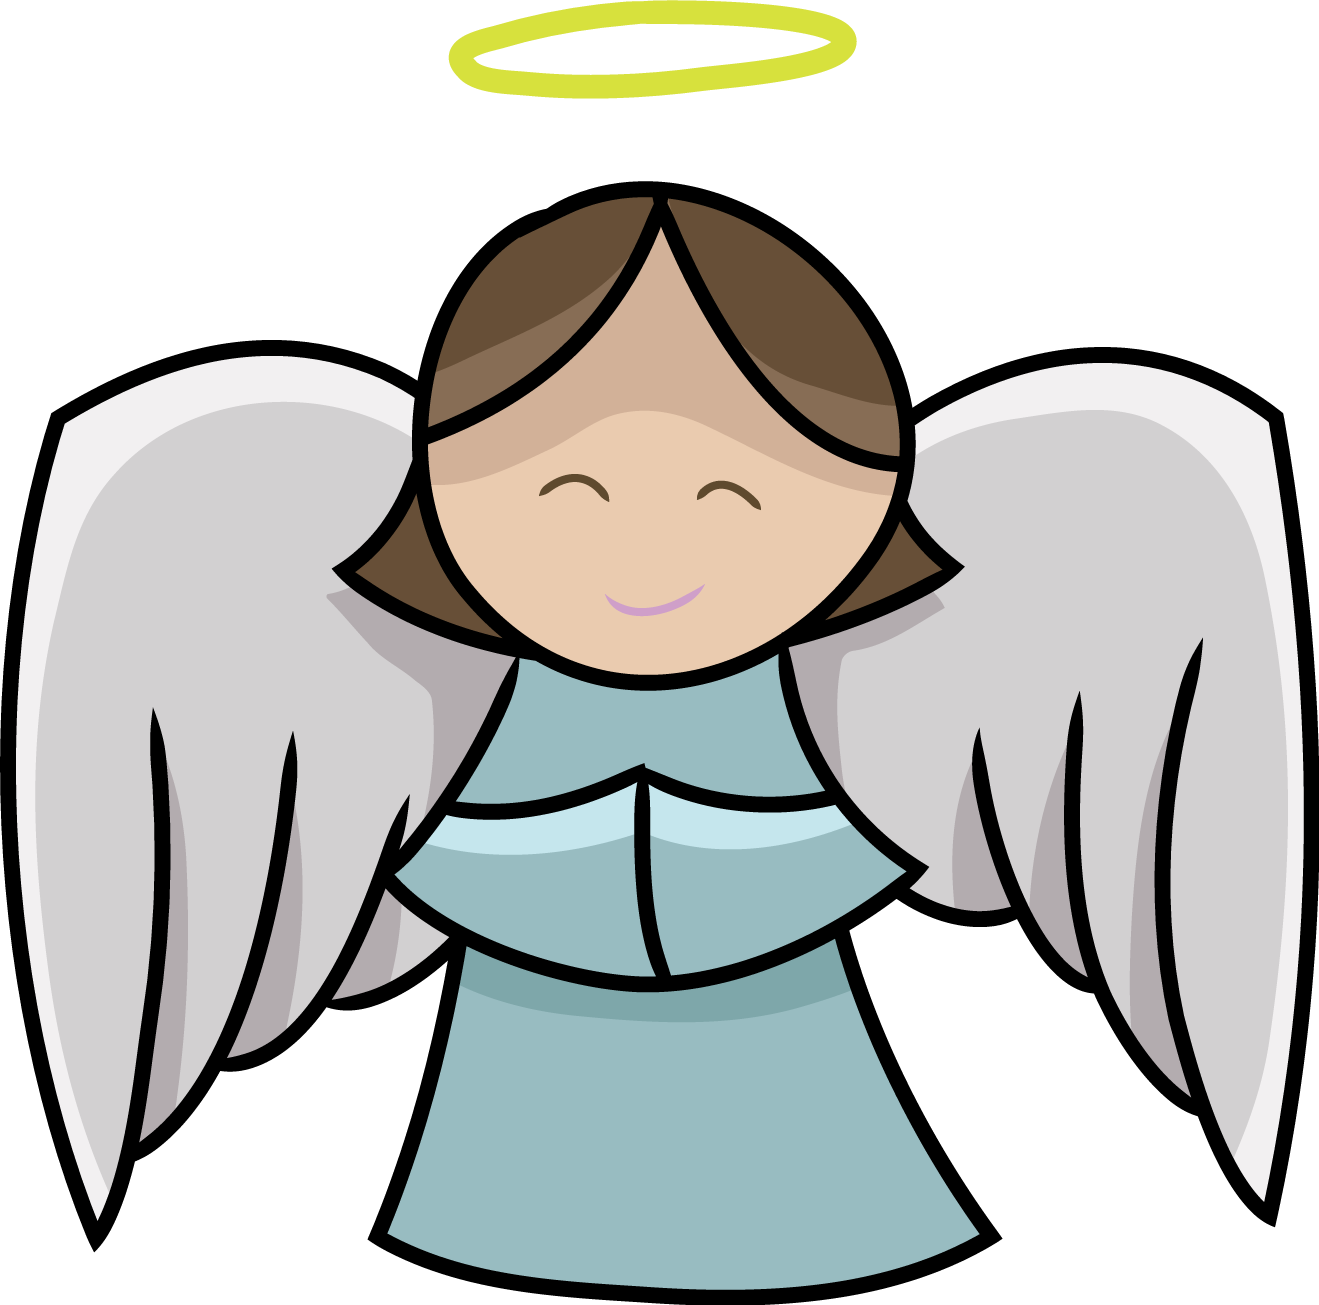 Angel free to use cliparts - Clip Art Angel